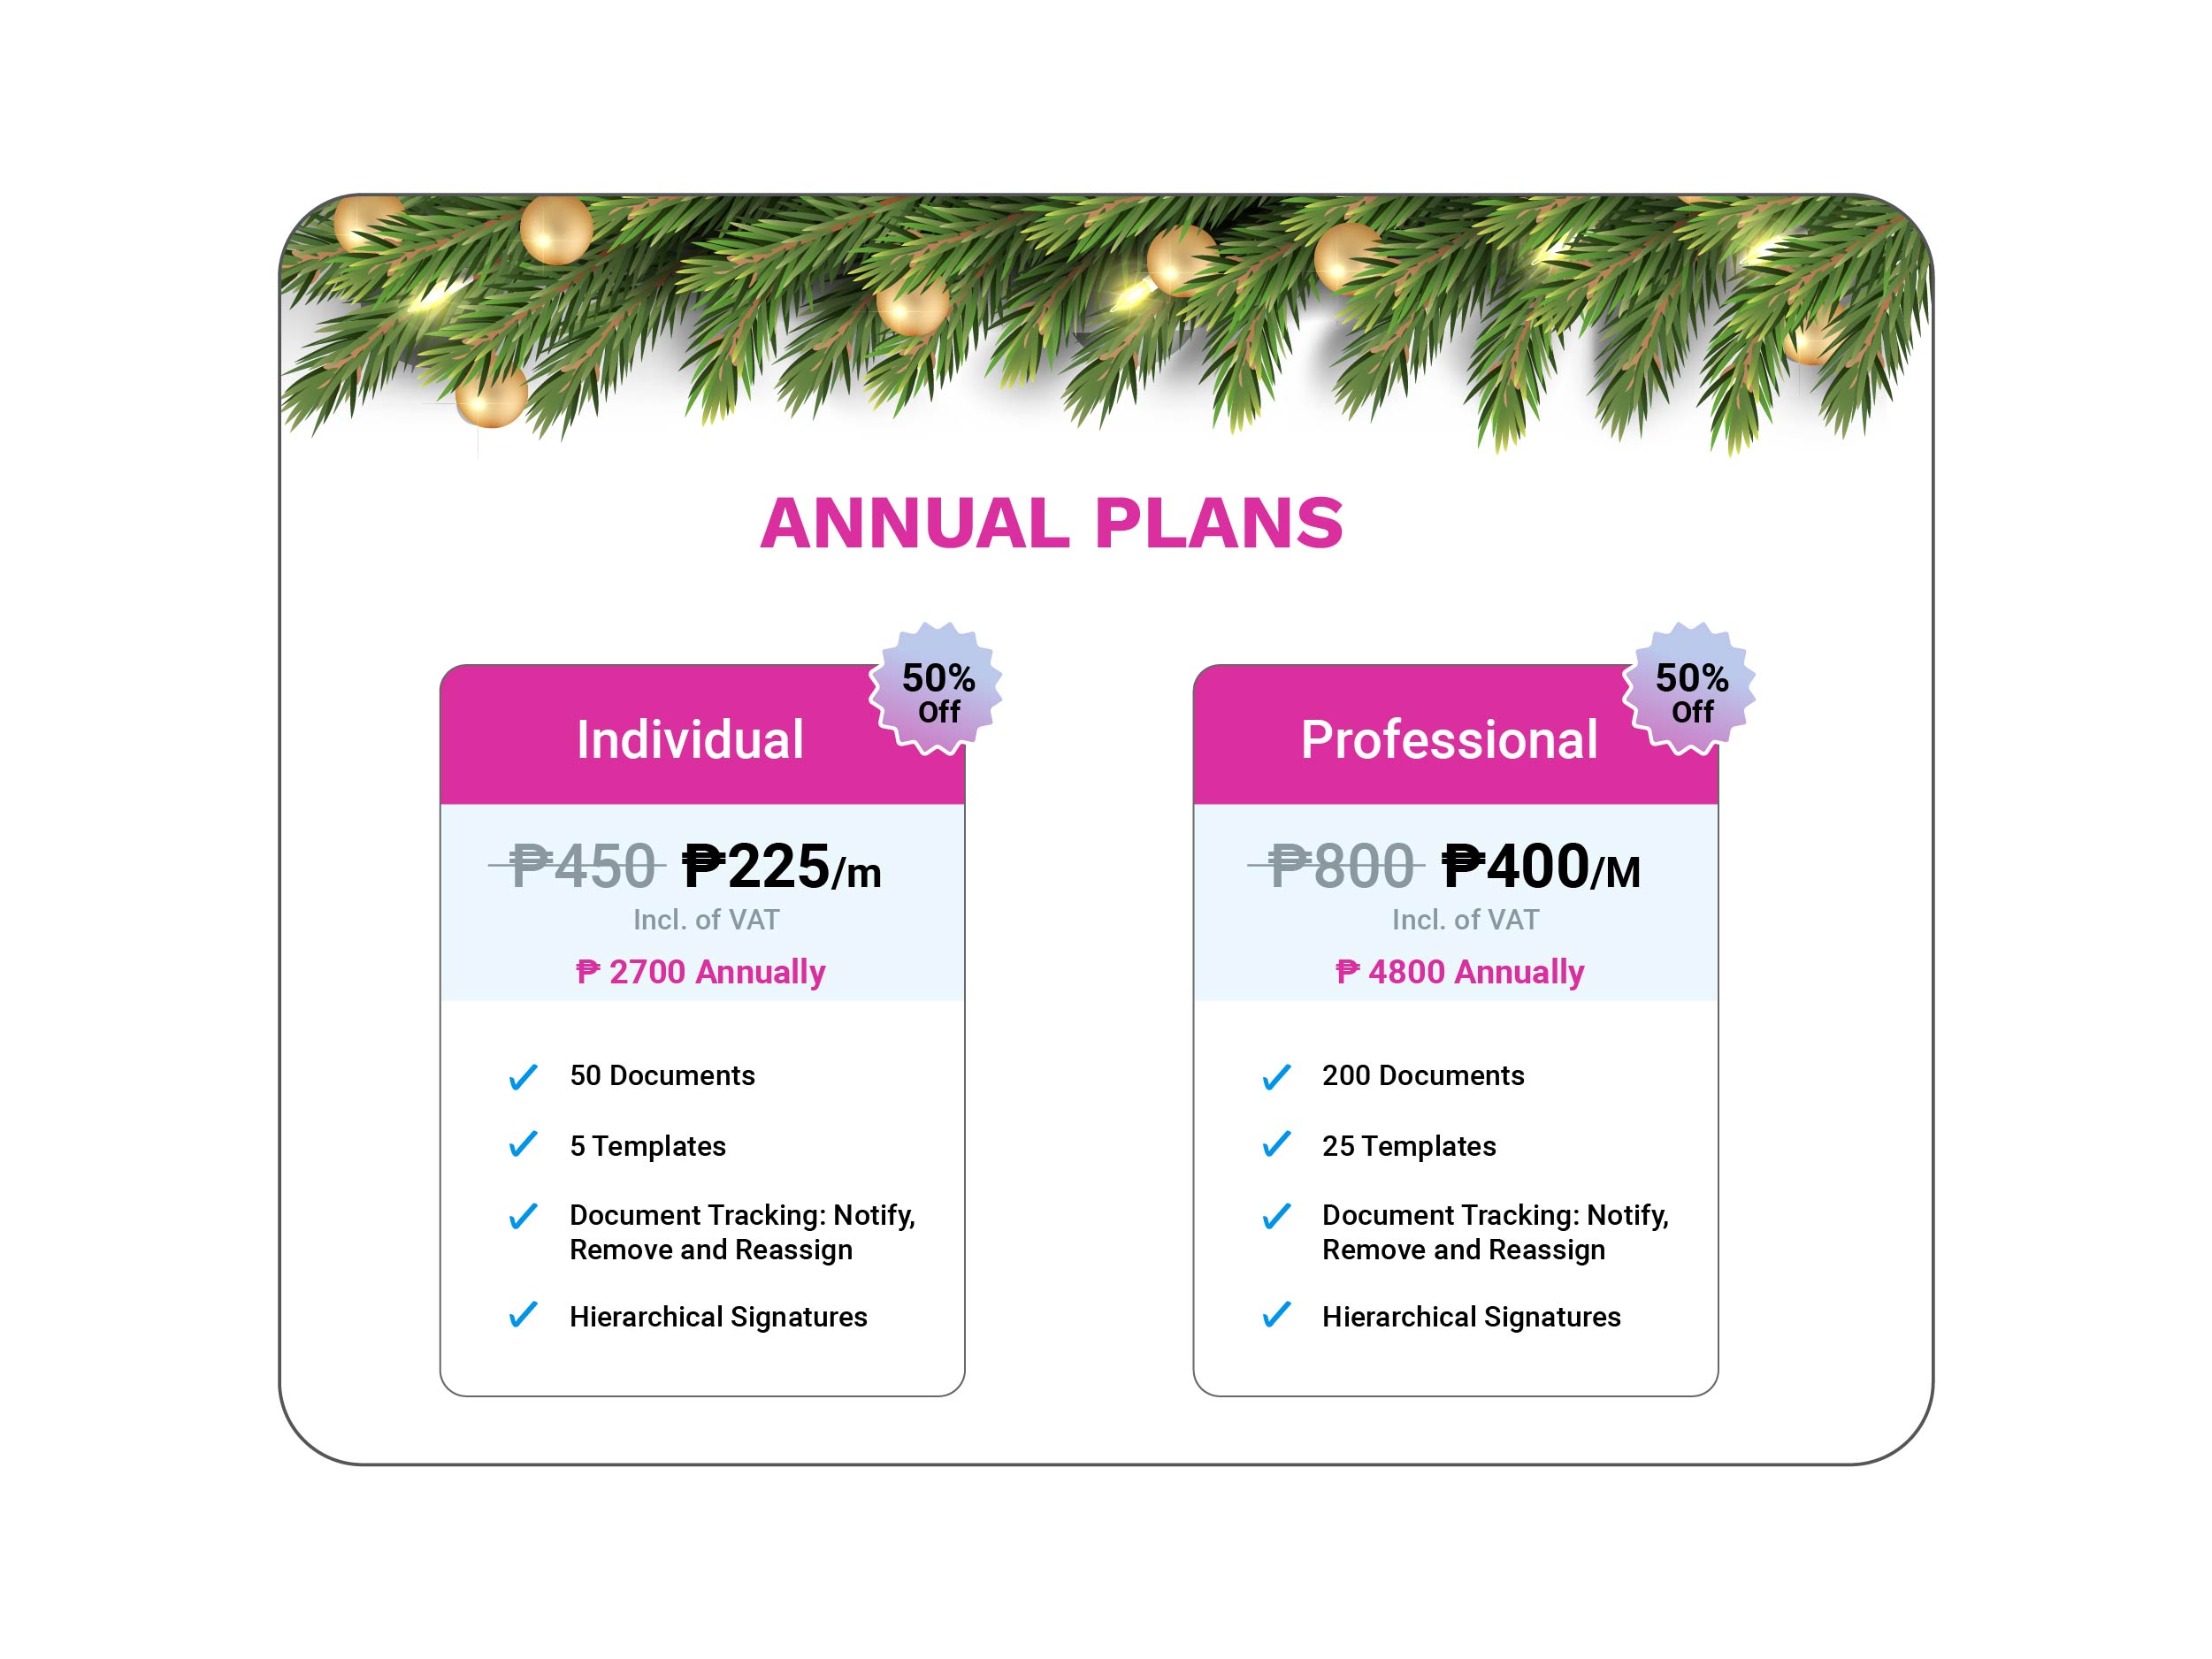 DrySign introduces 50% off on Annual Plans!